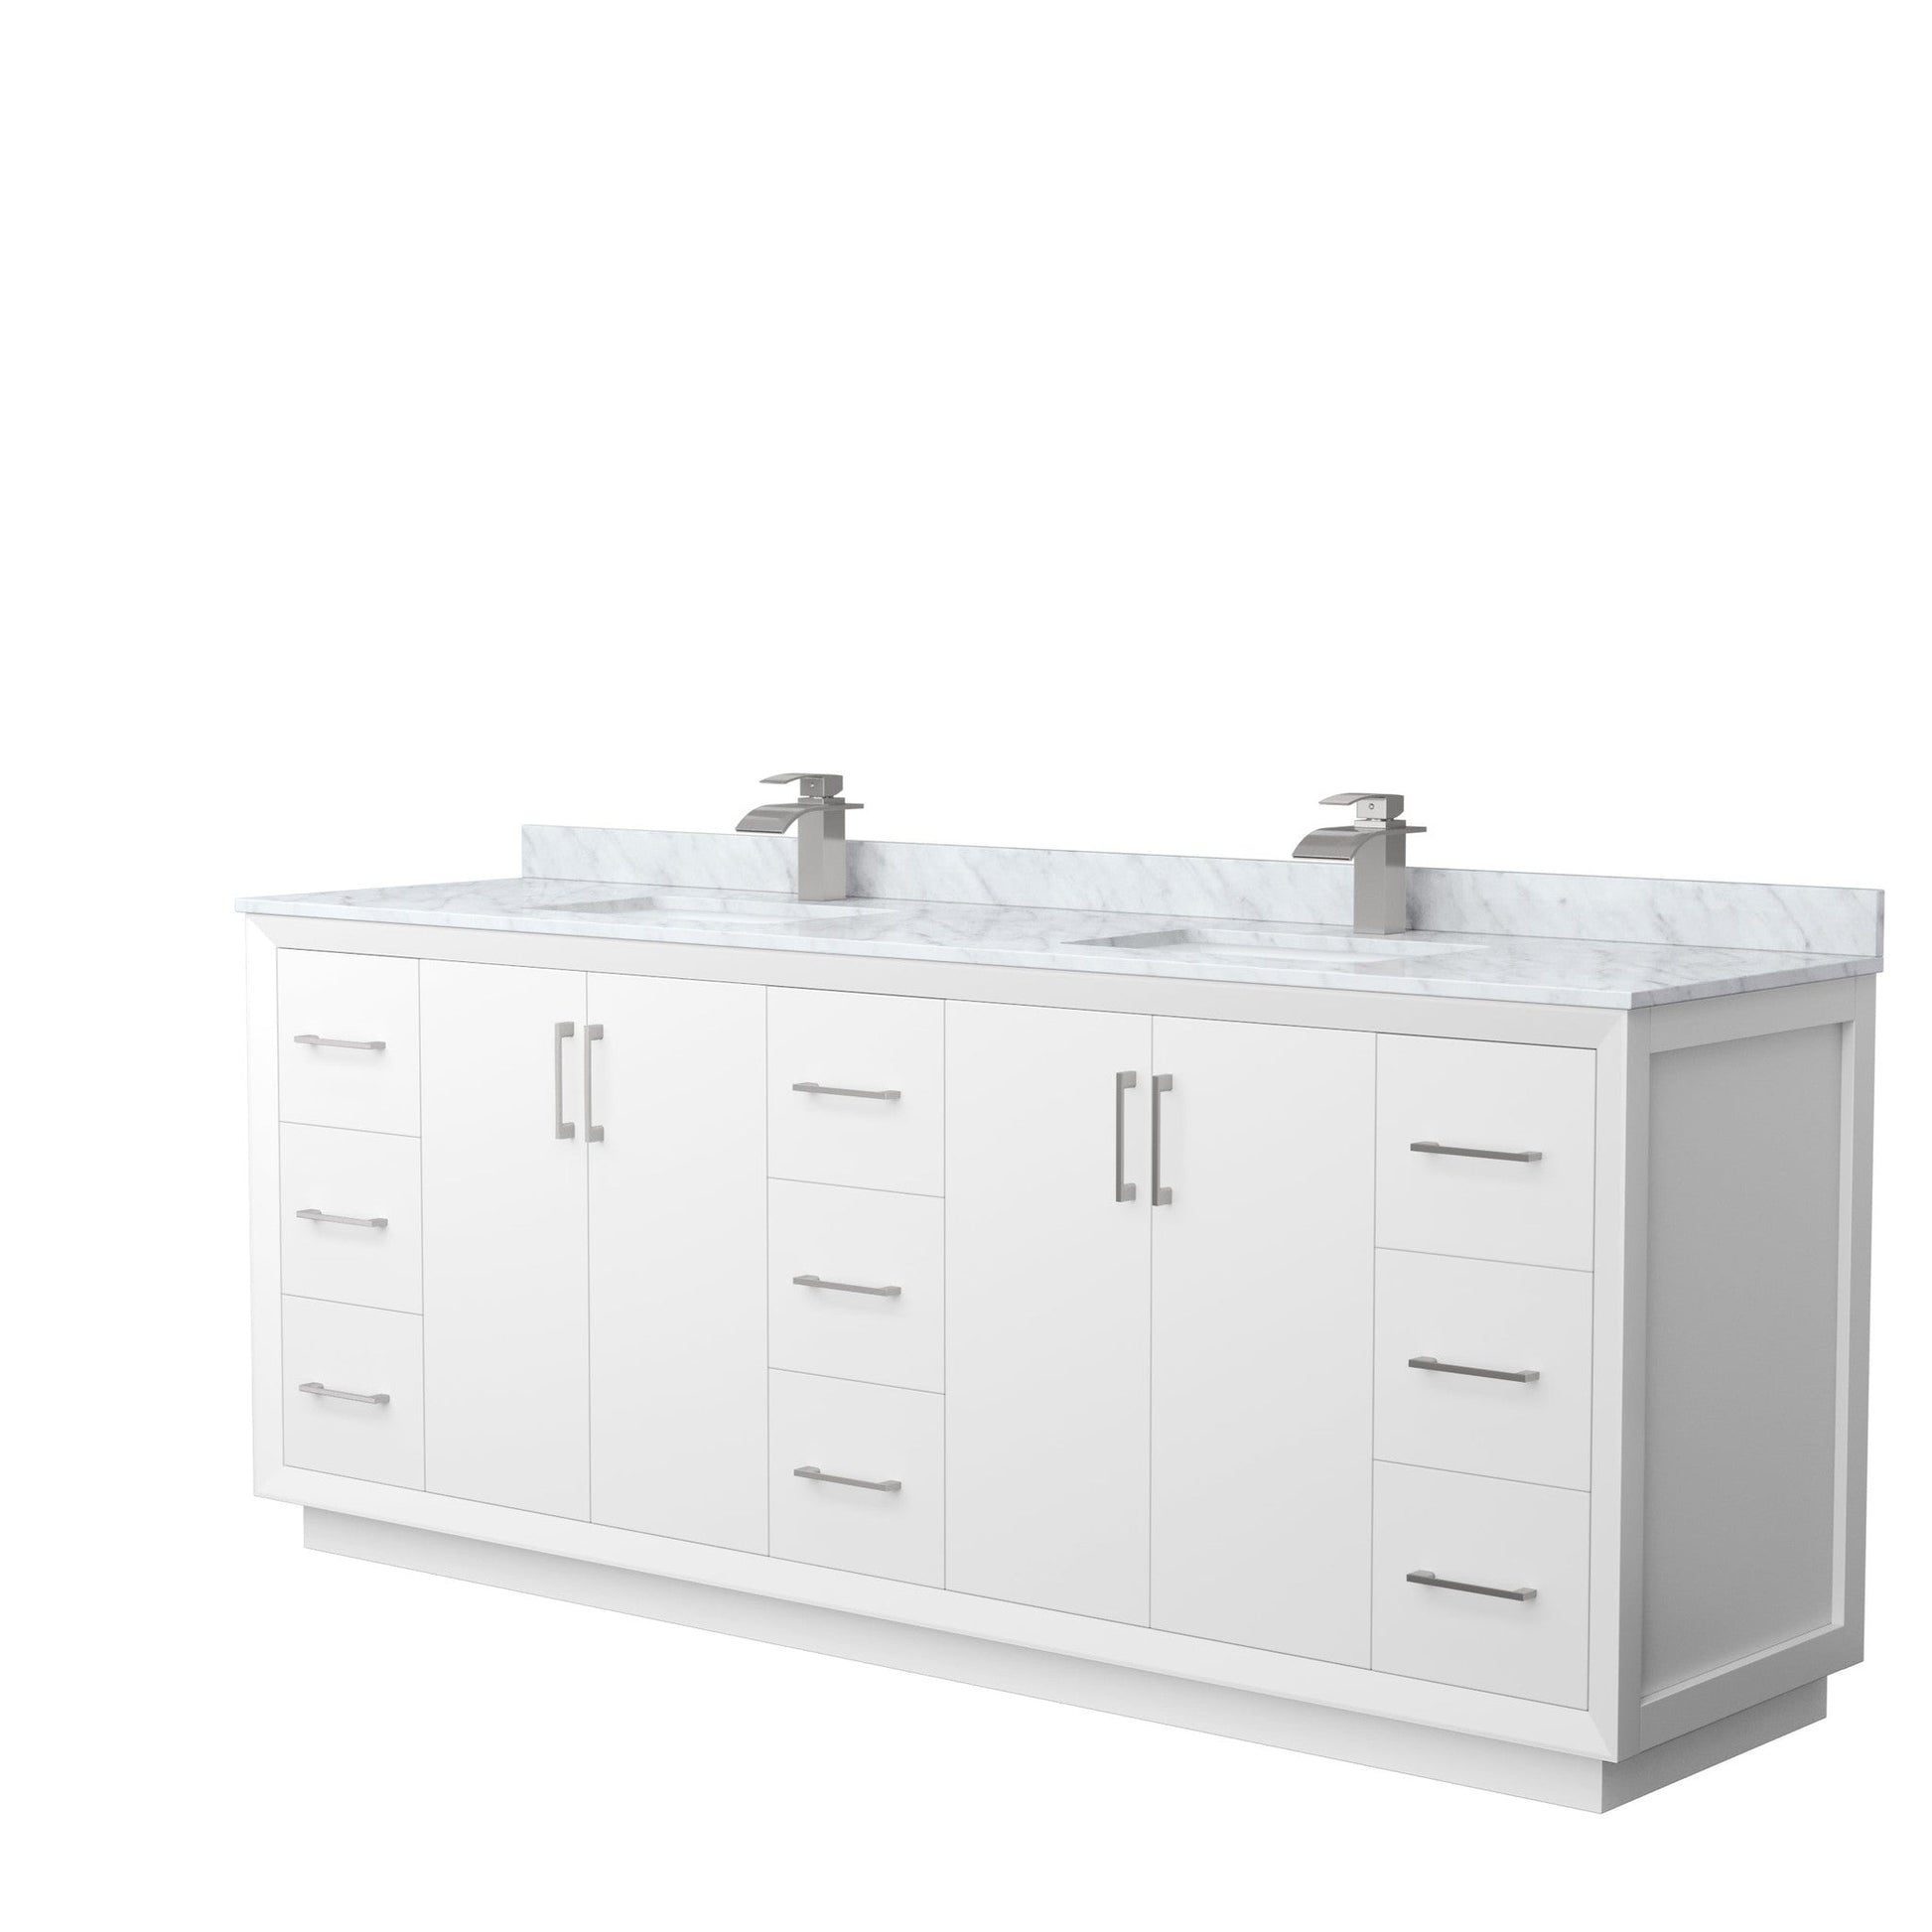 Wyndham Collection Strada 84" Double Bathroom Vanity in White, White Carrara Marble Countertop, Undermount Square Sink, Brushed Nickel Trim